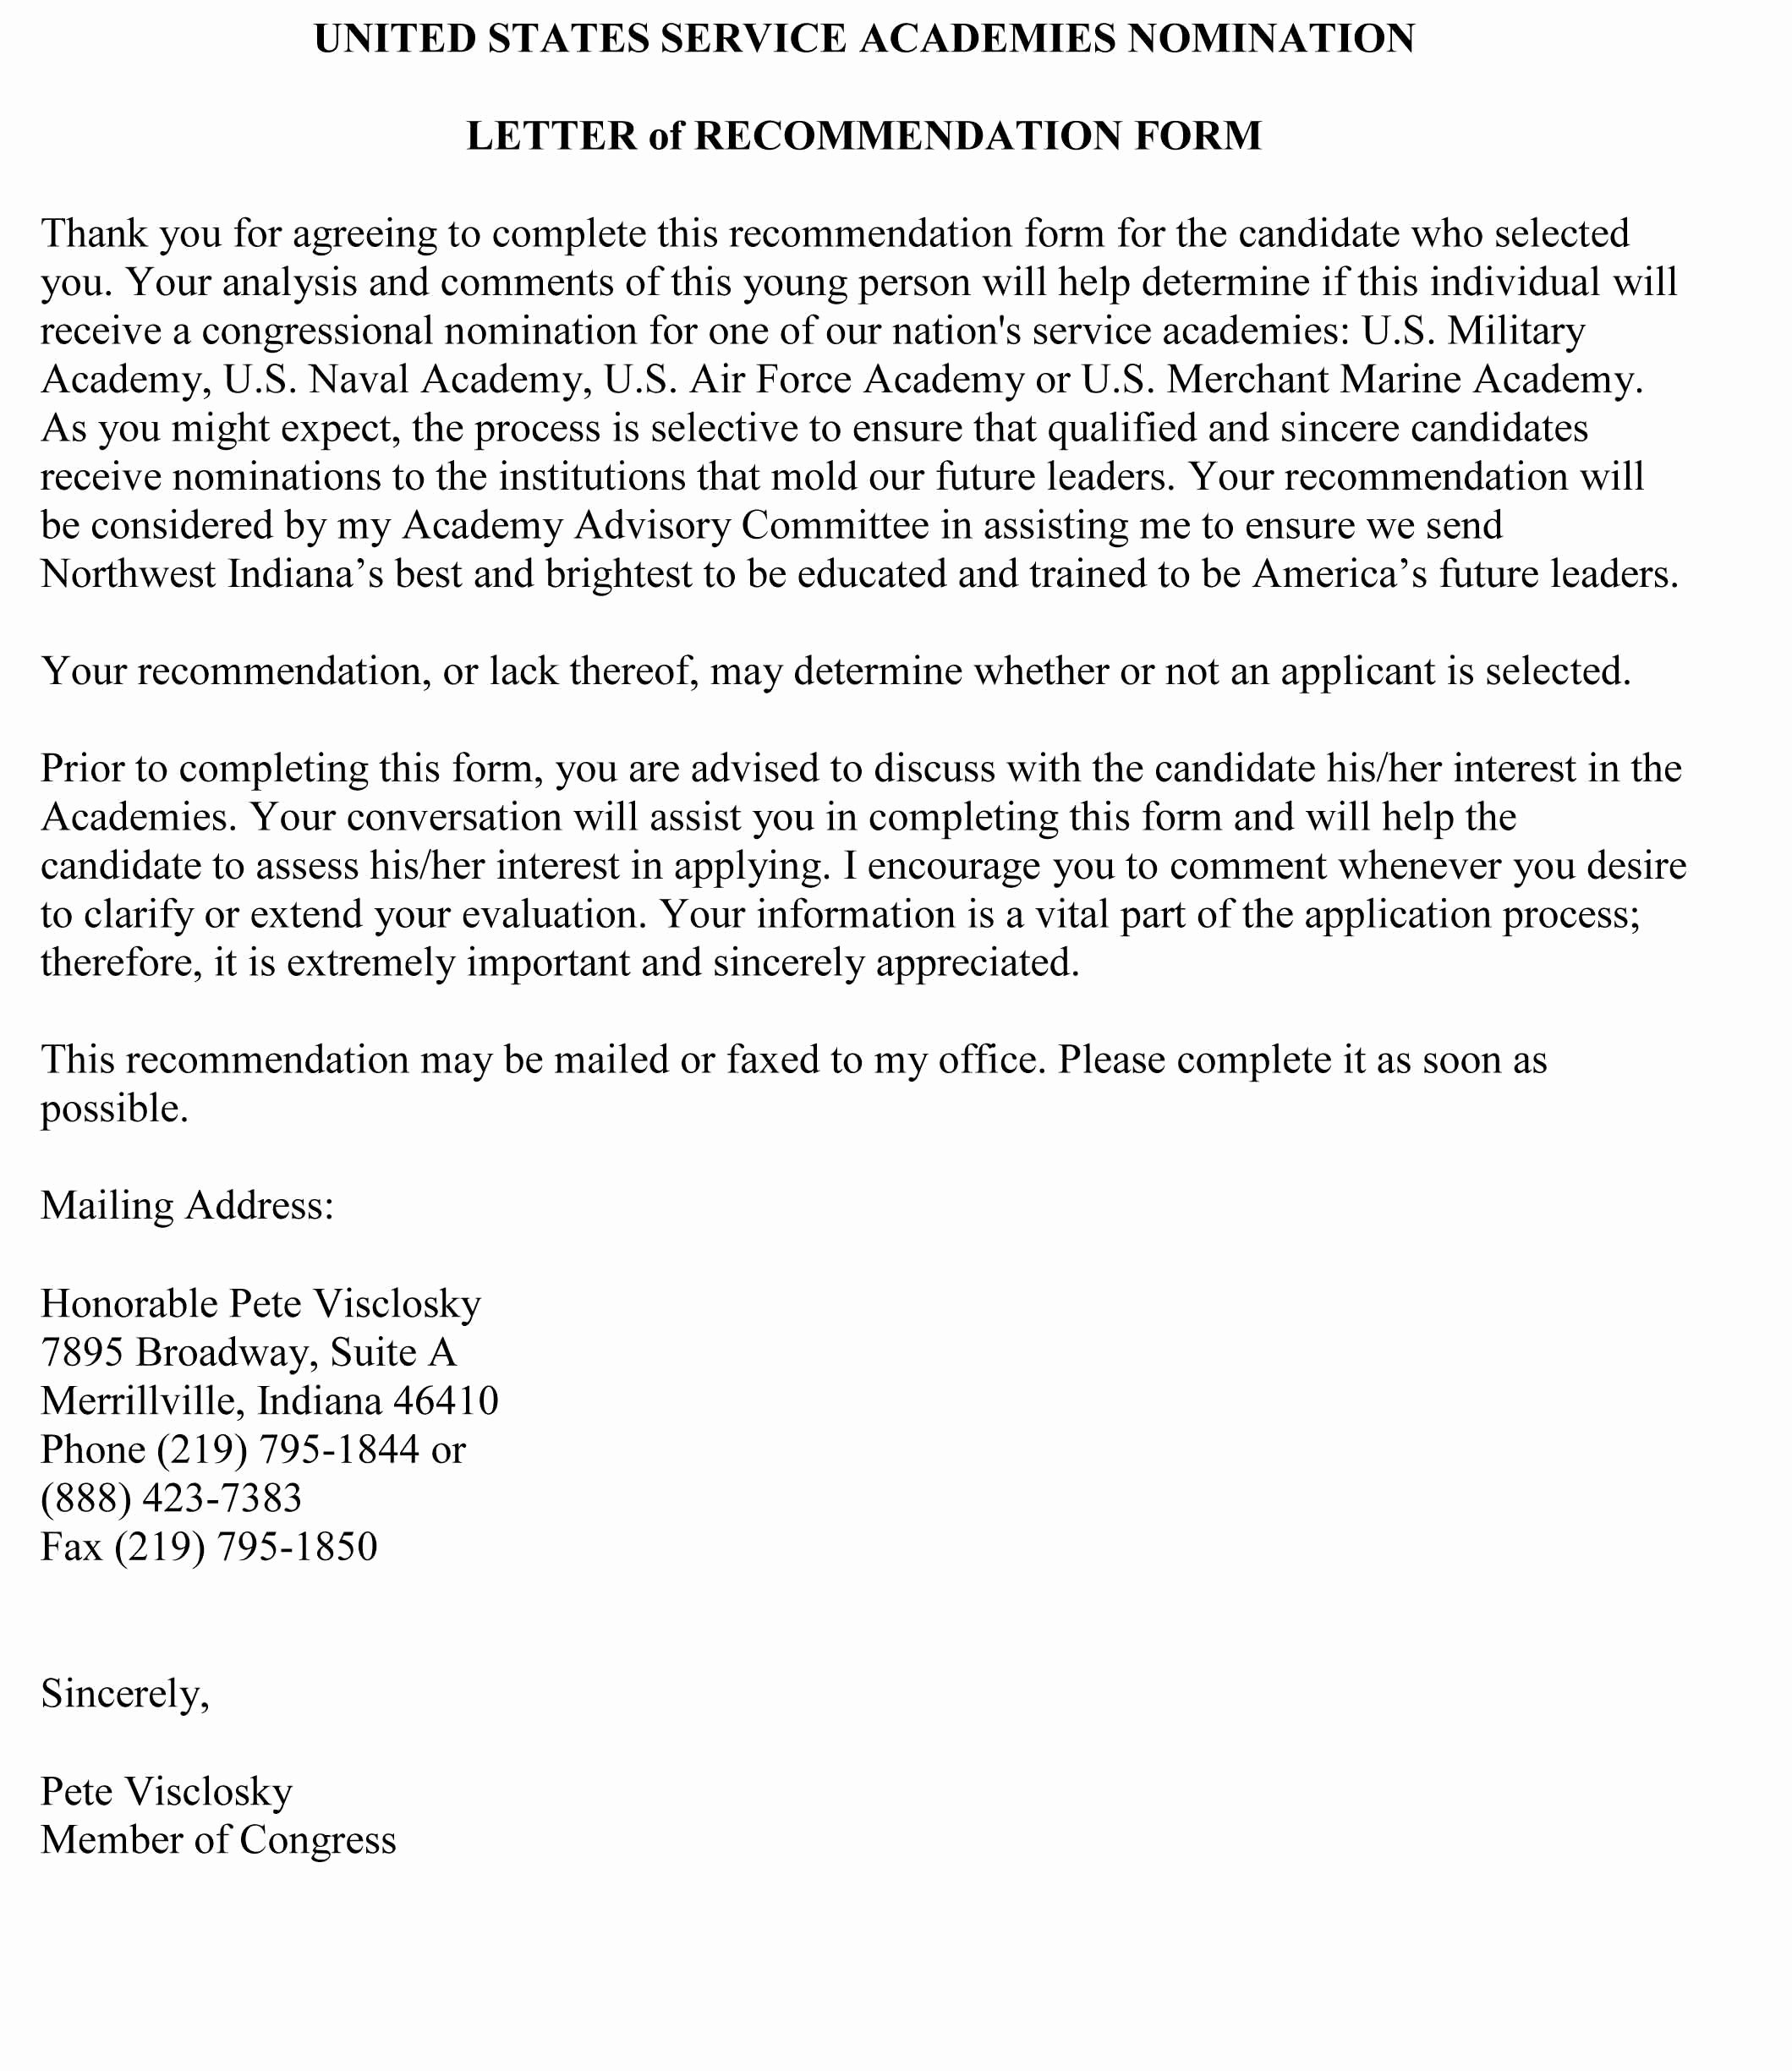 Naval Academy Recommendation Letter Best Of Free United State Service Academies Nomination